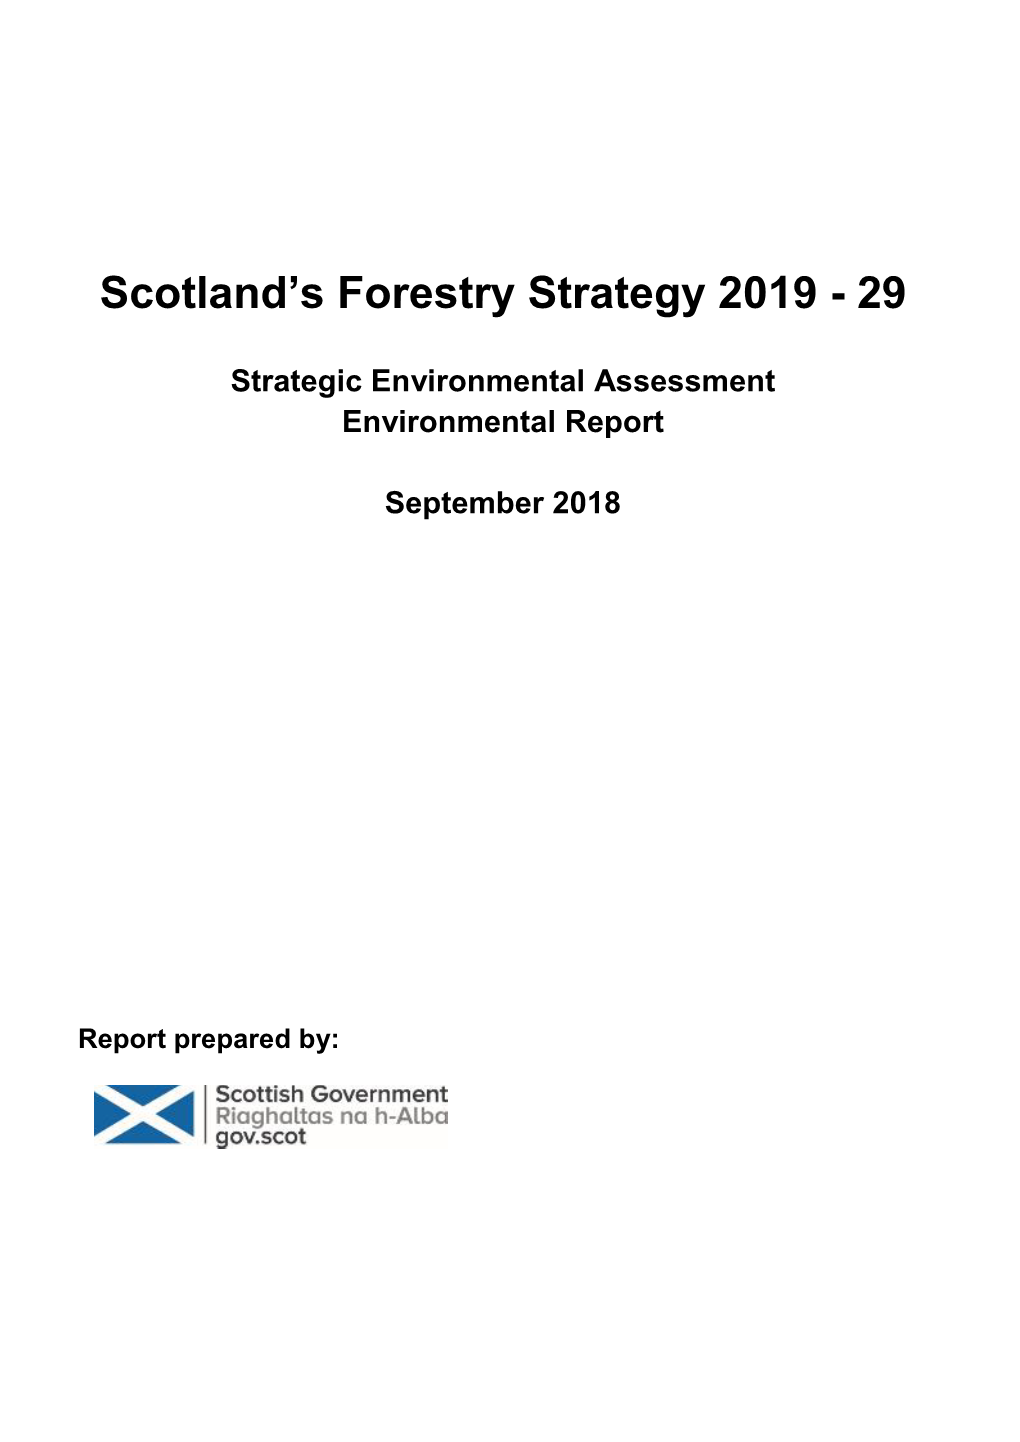 Scotland's Forestry Strategy 2019